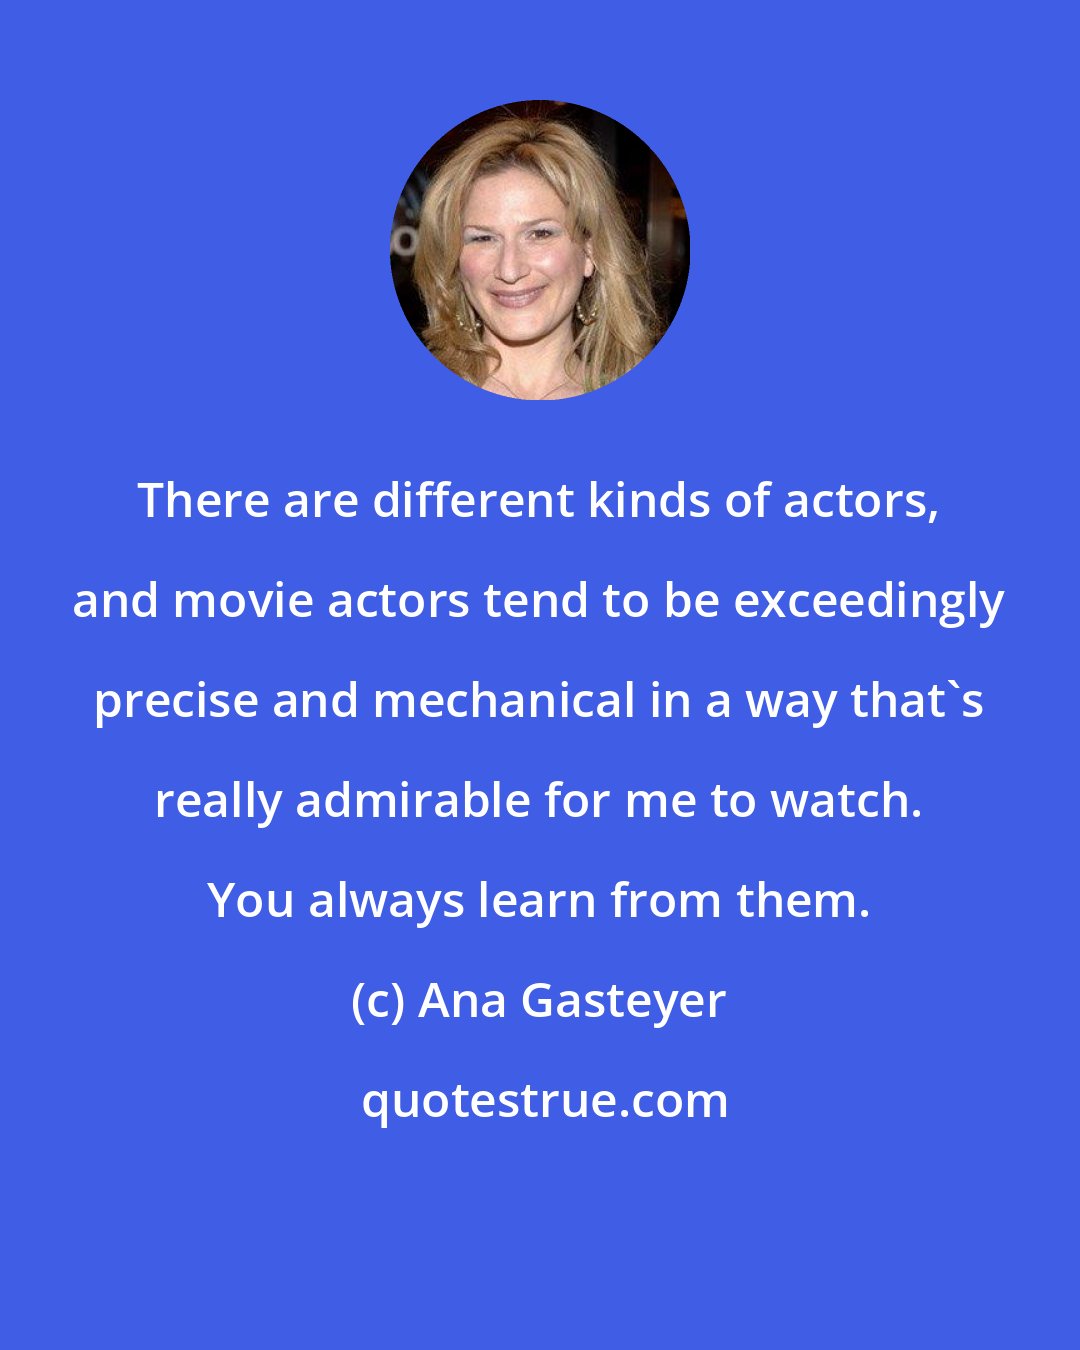 Ana Gasteyer: There are different kinds of actors, and movie actors tend to be exceedingly precise and mechanical in a way that's really admirable for me to watch. You always learn from them.